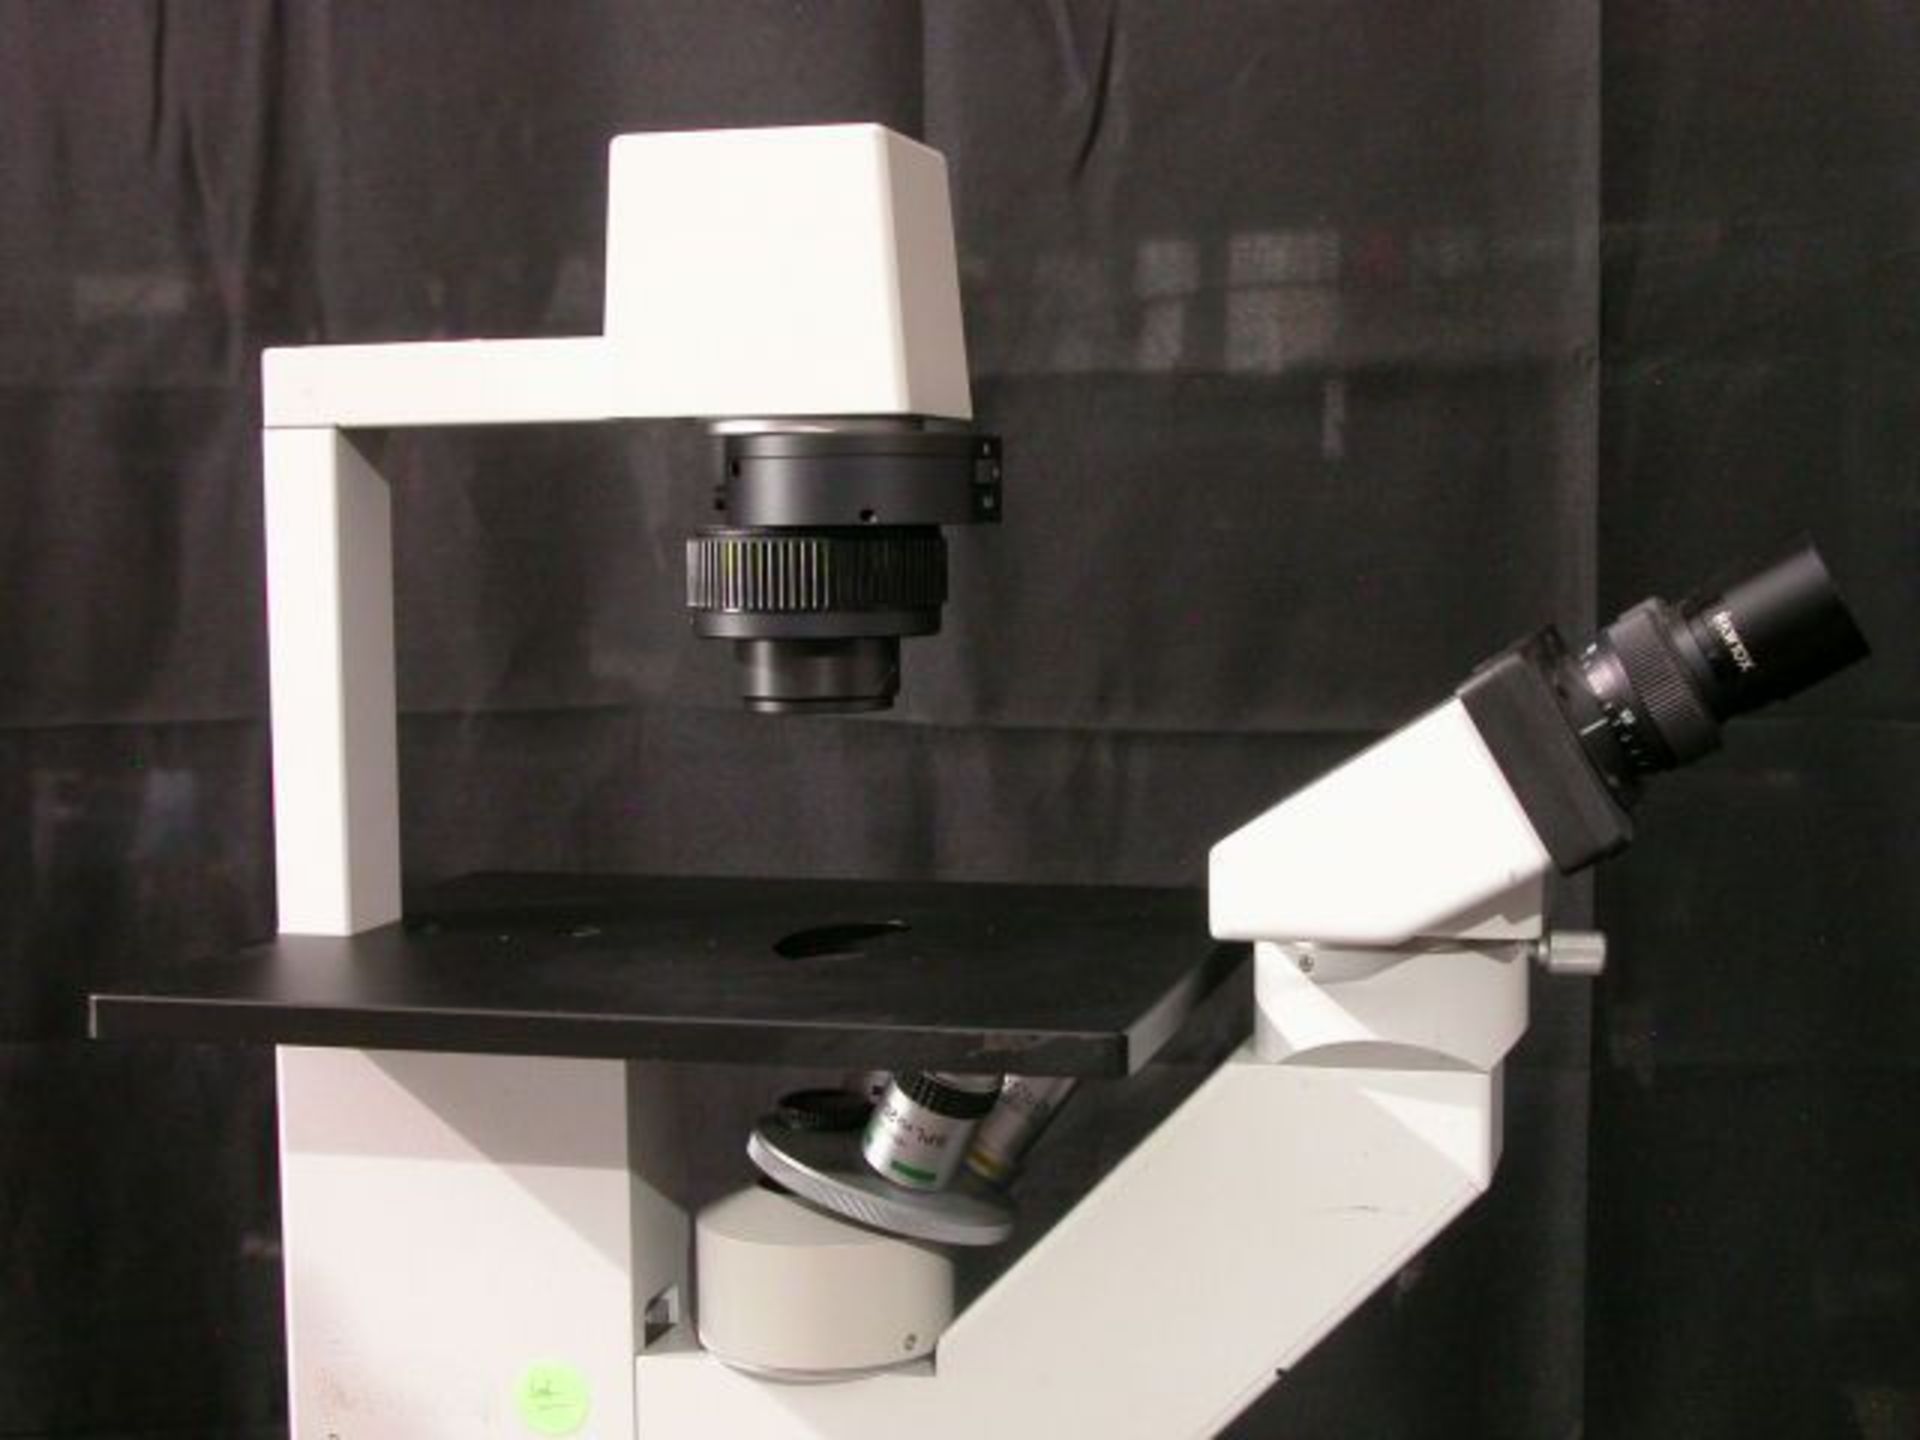 Hund Wetzlar Wilovert A Inverted Microscope 2 Ocular 3 Objectives, Qty 1, 330800442517 - Image 15 of 16